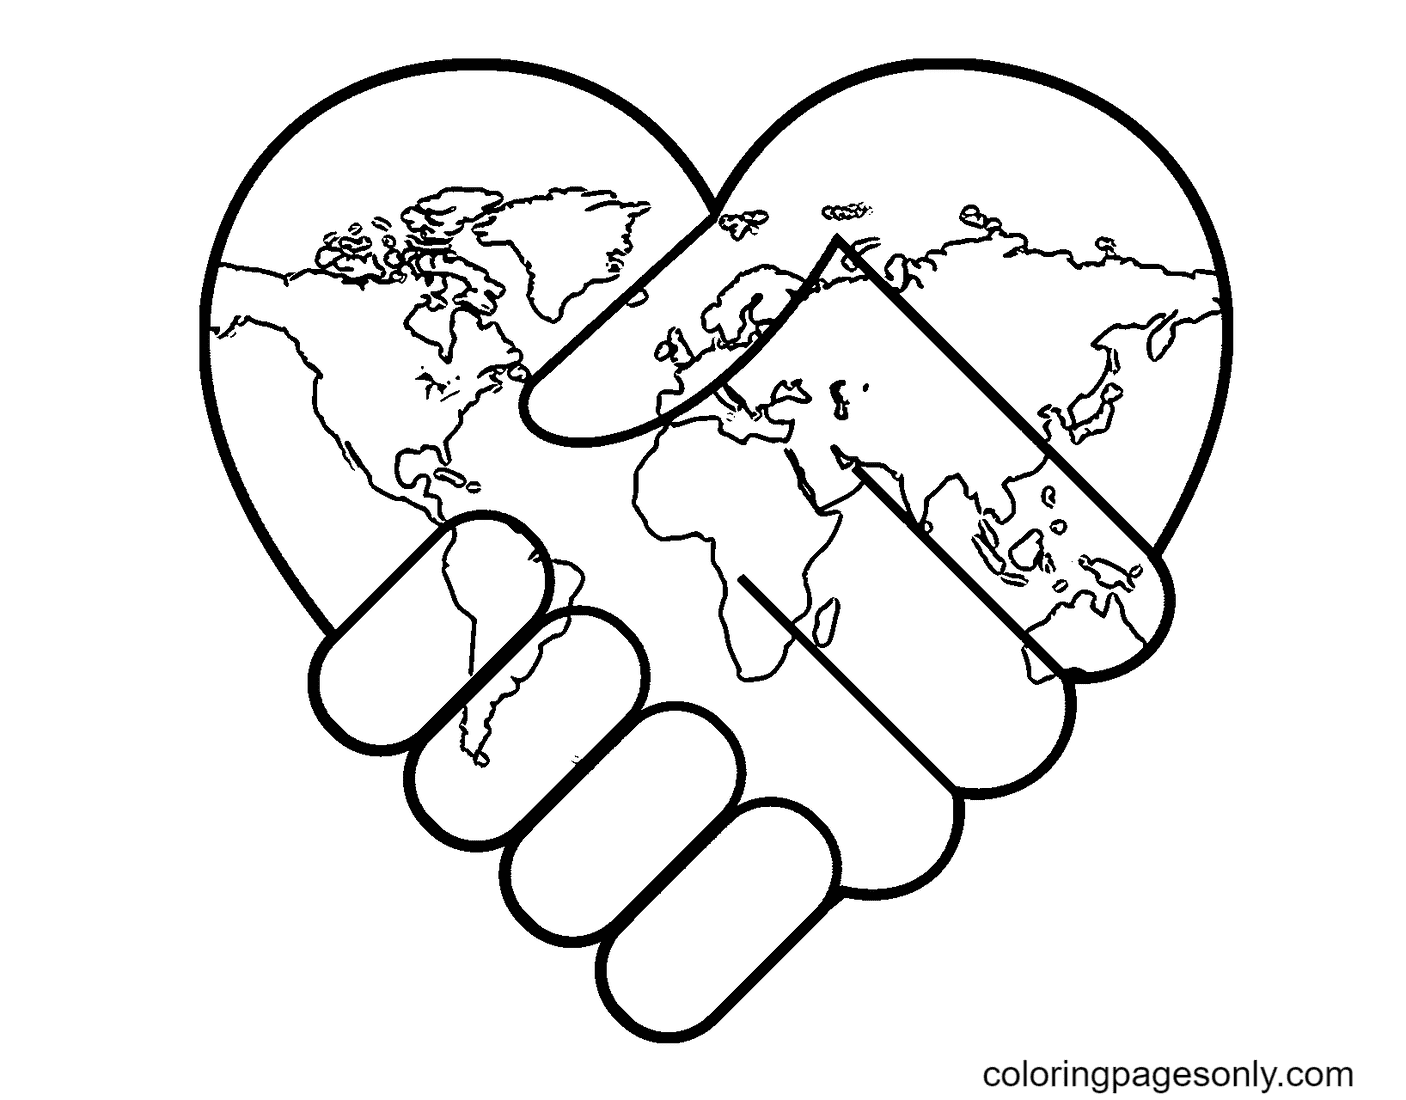 World Peace Day September 21 Coloring Page